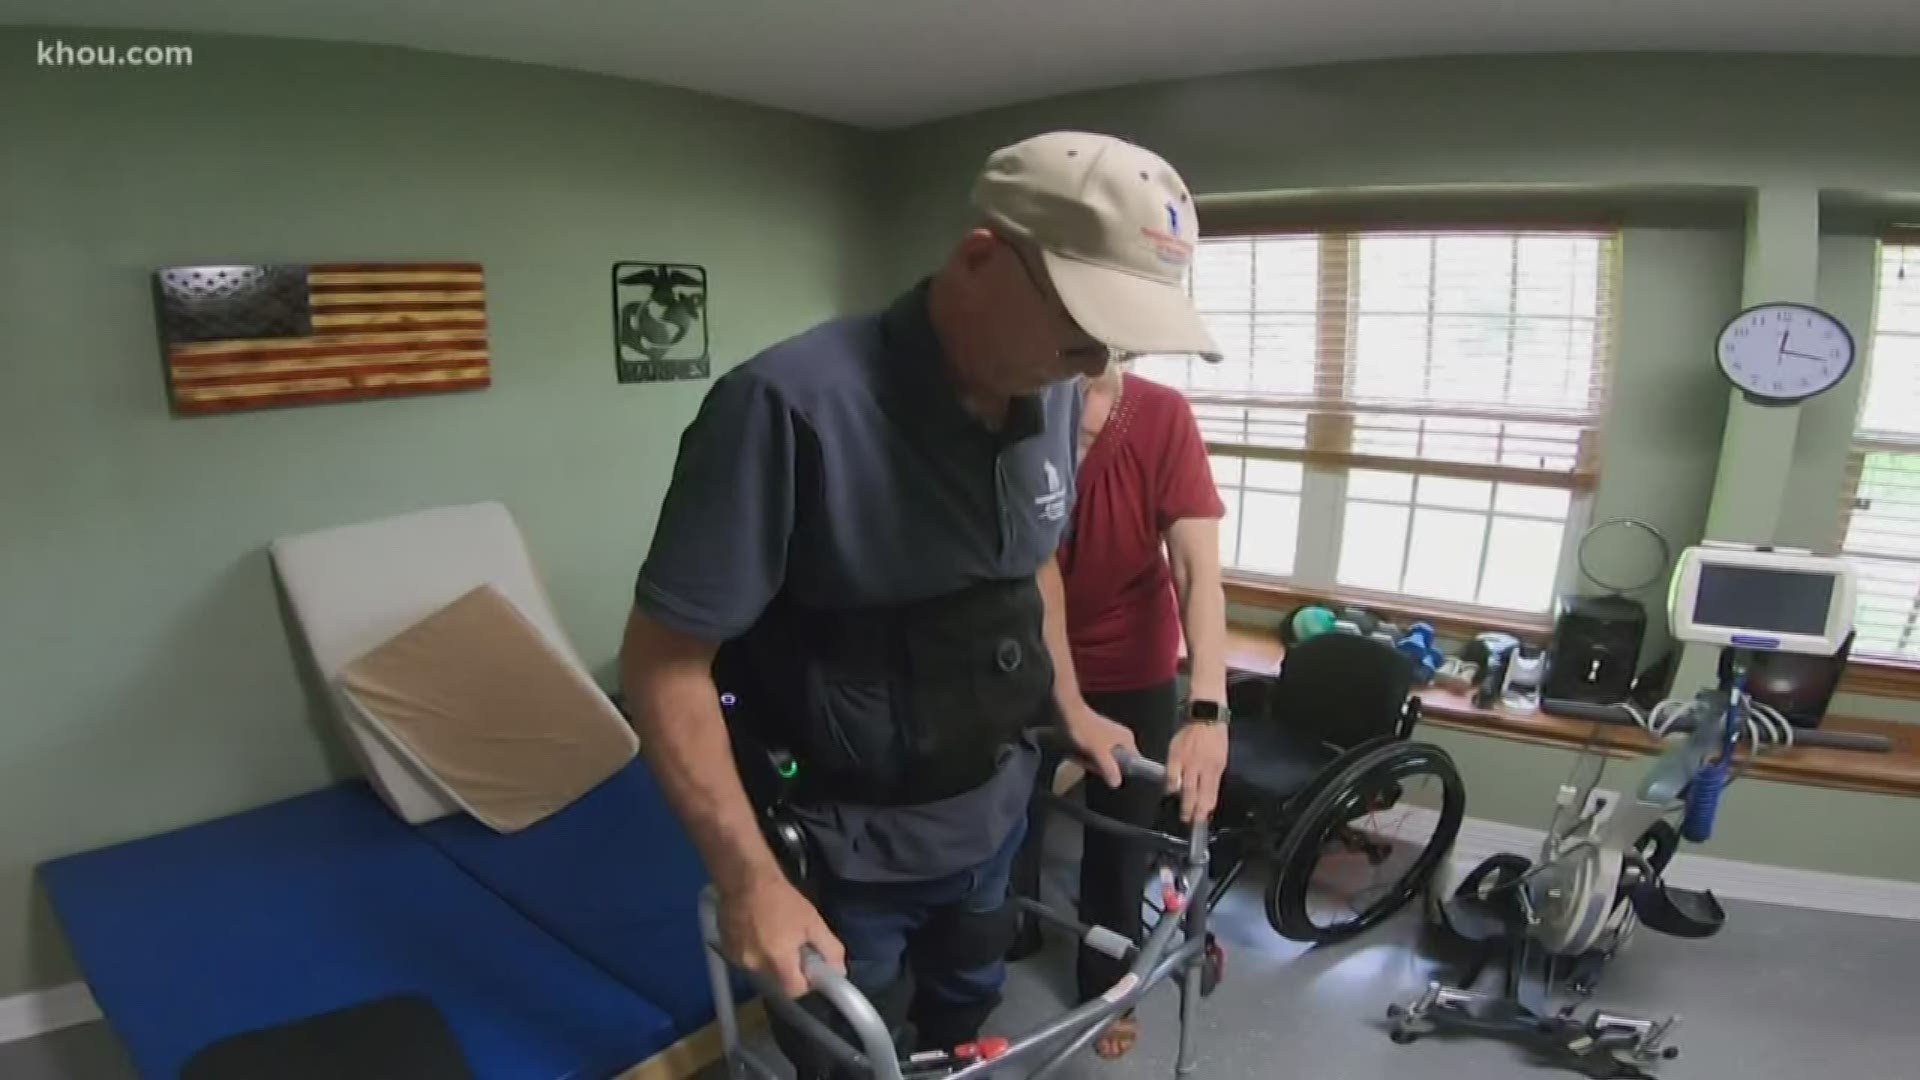 Robotic legs, operated through a smartphone app, are allowing a paralyzed veteran to walk for the first time in 10 years.